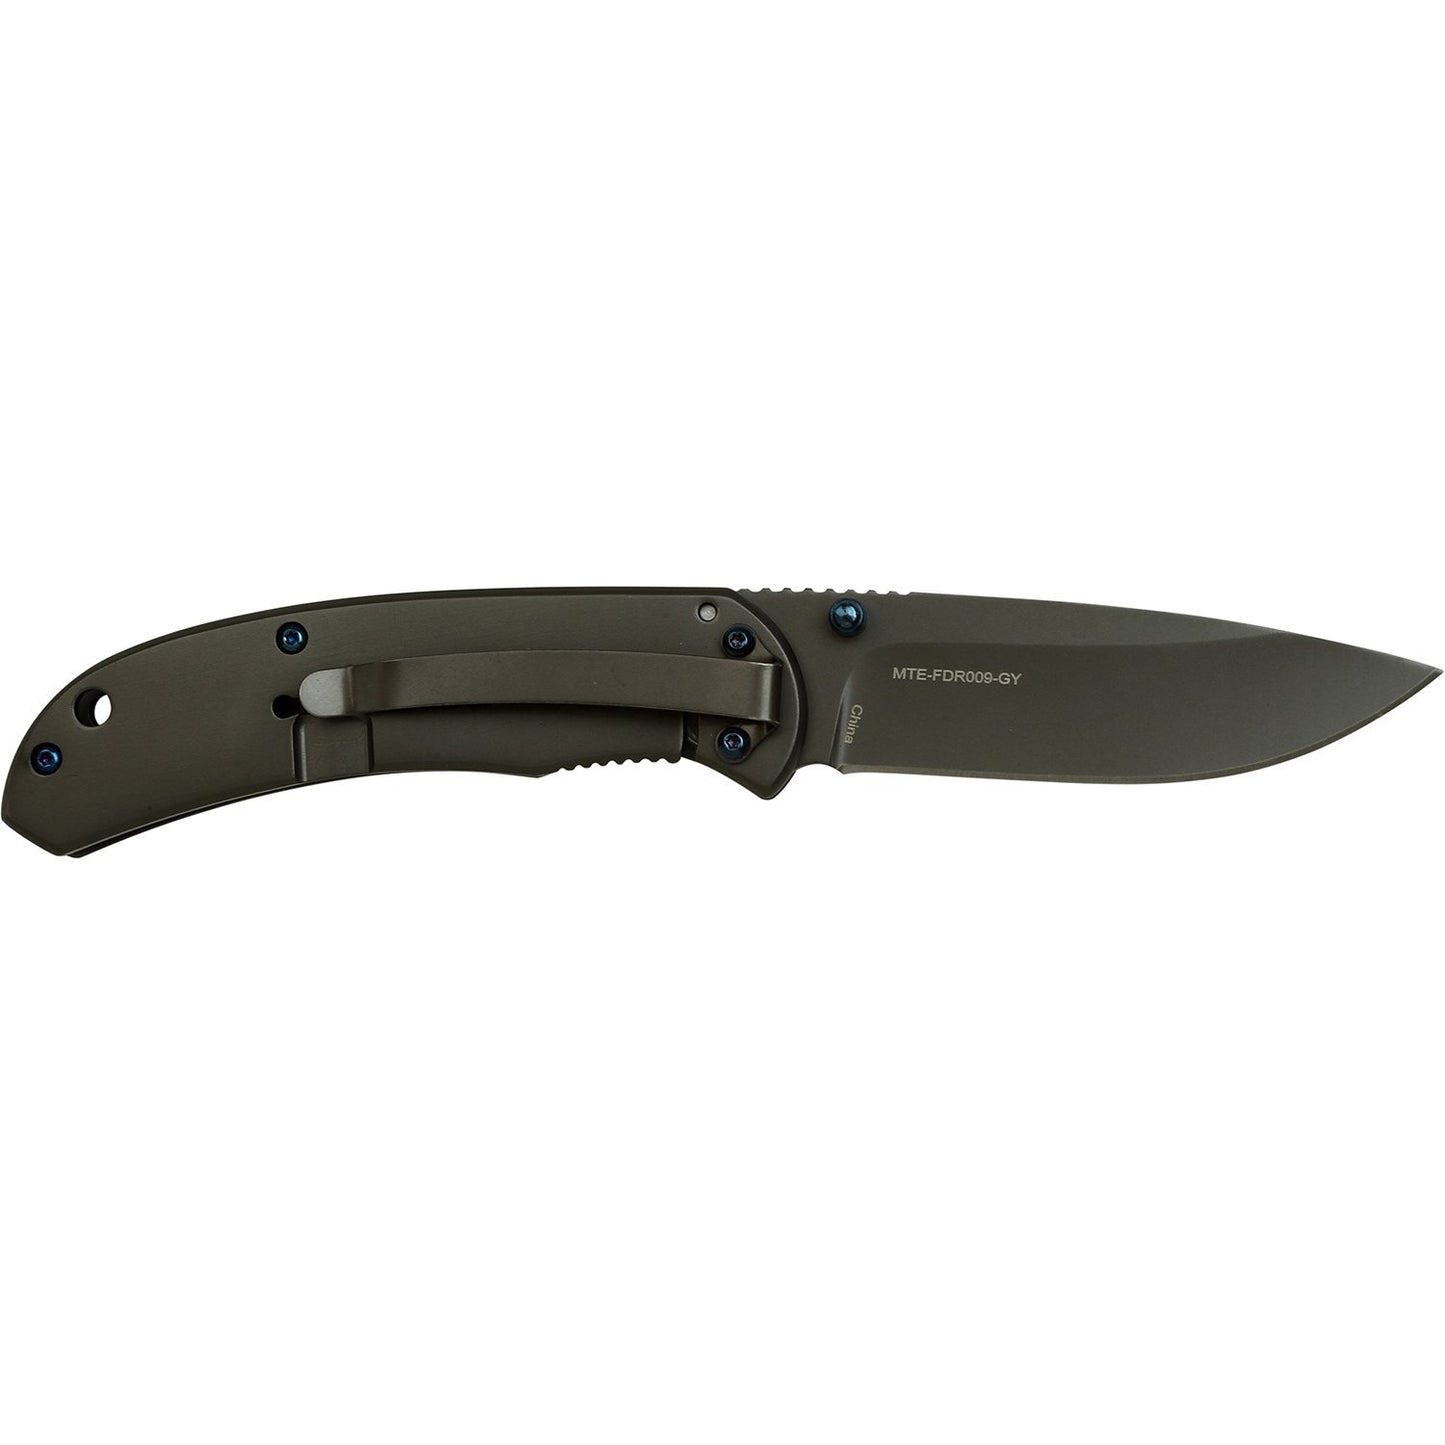 Mtech Mtech Evolution Tinite Coated Tactical Folding Knife - 4.3In Dual Thumb Studs #mte-Fdr009-Gy Dark Slate Gray